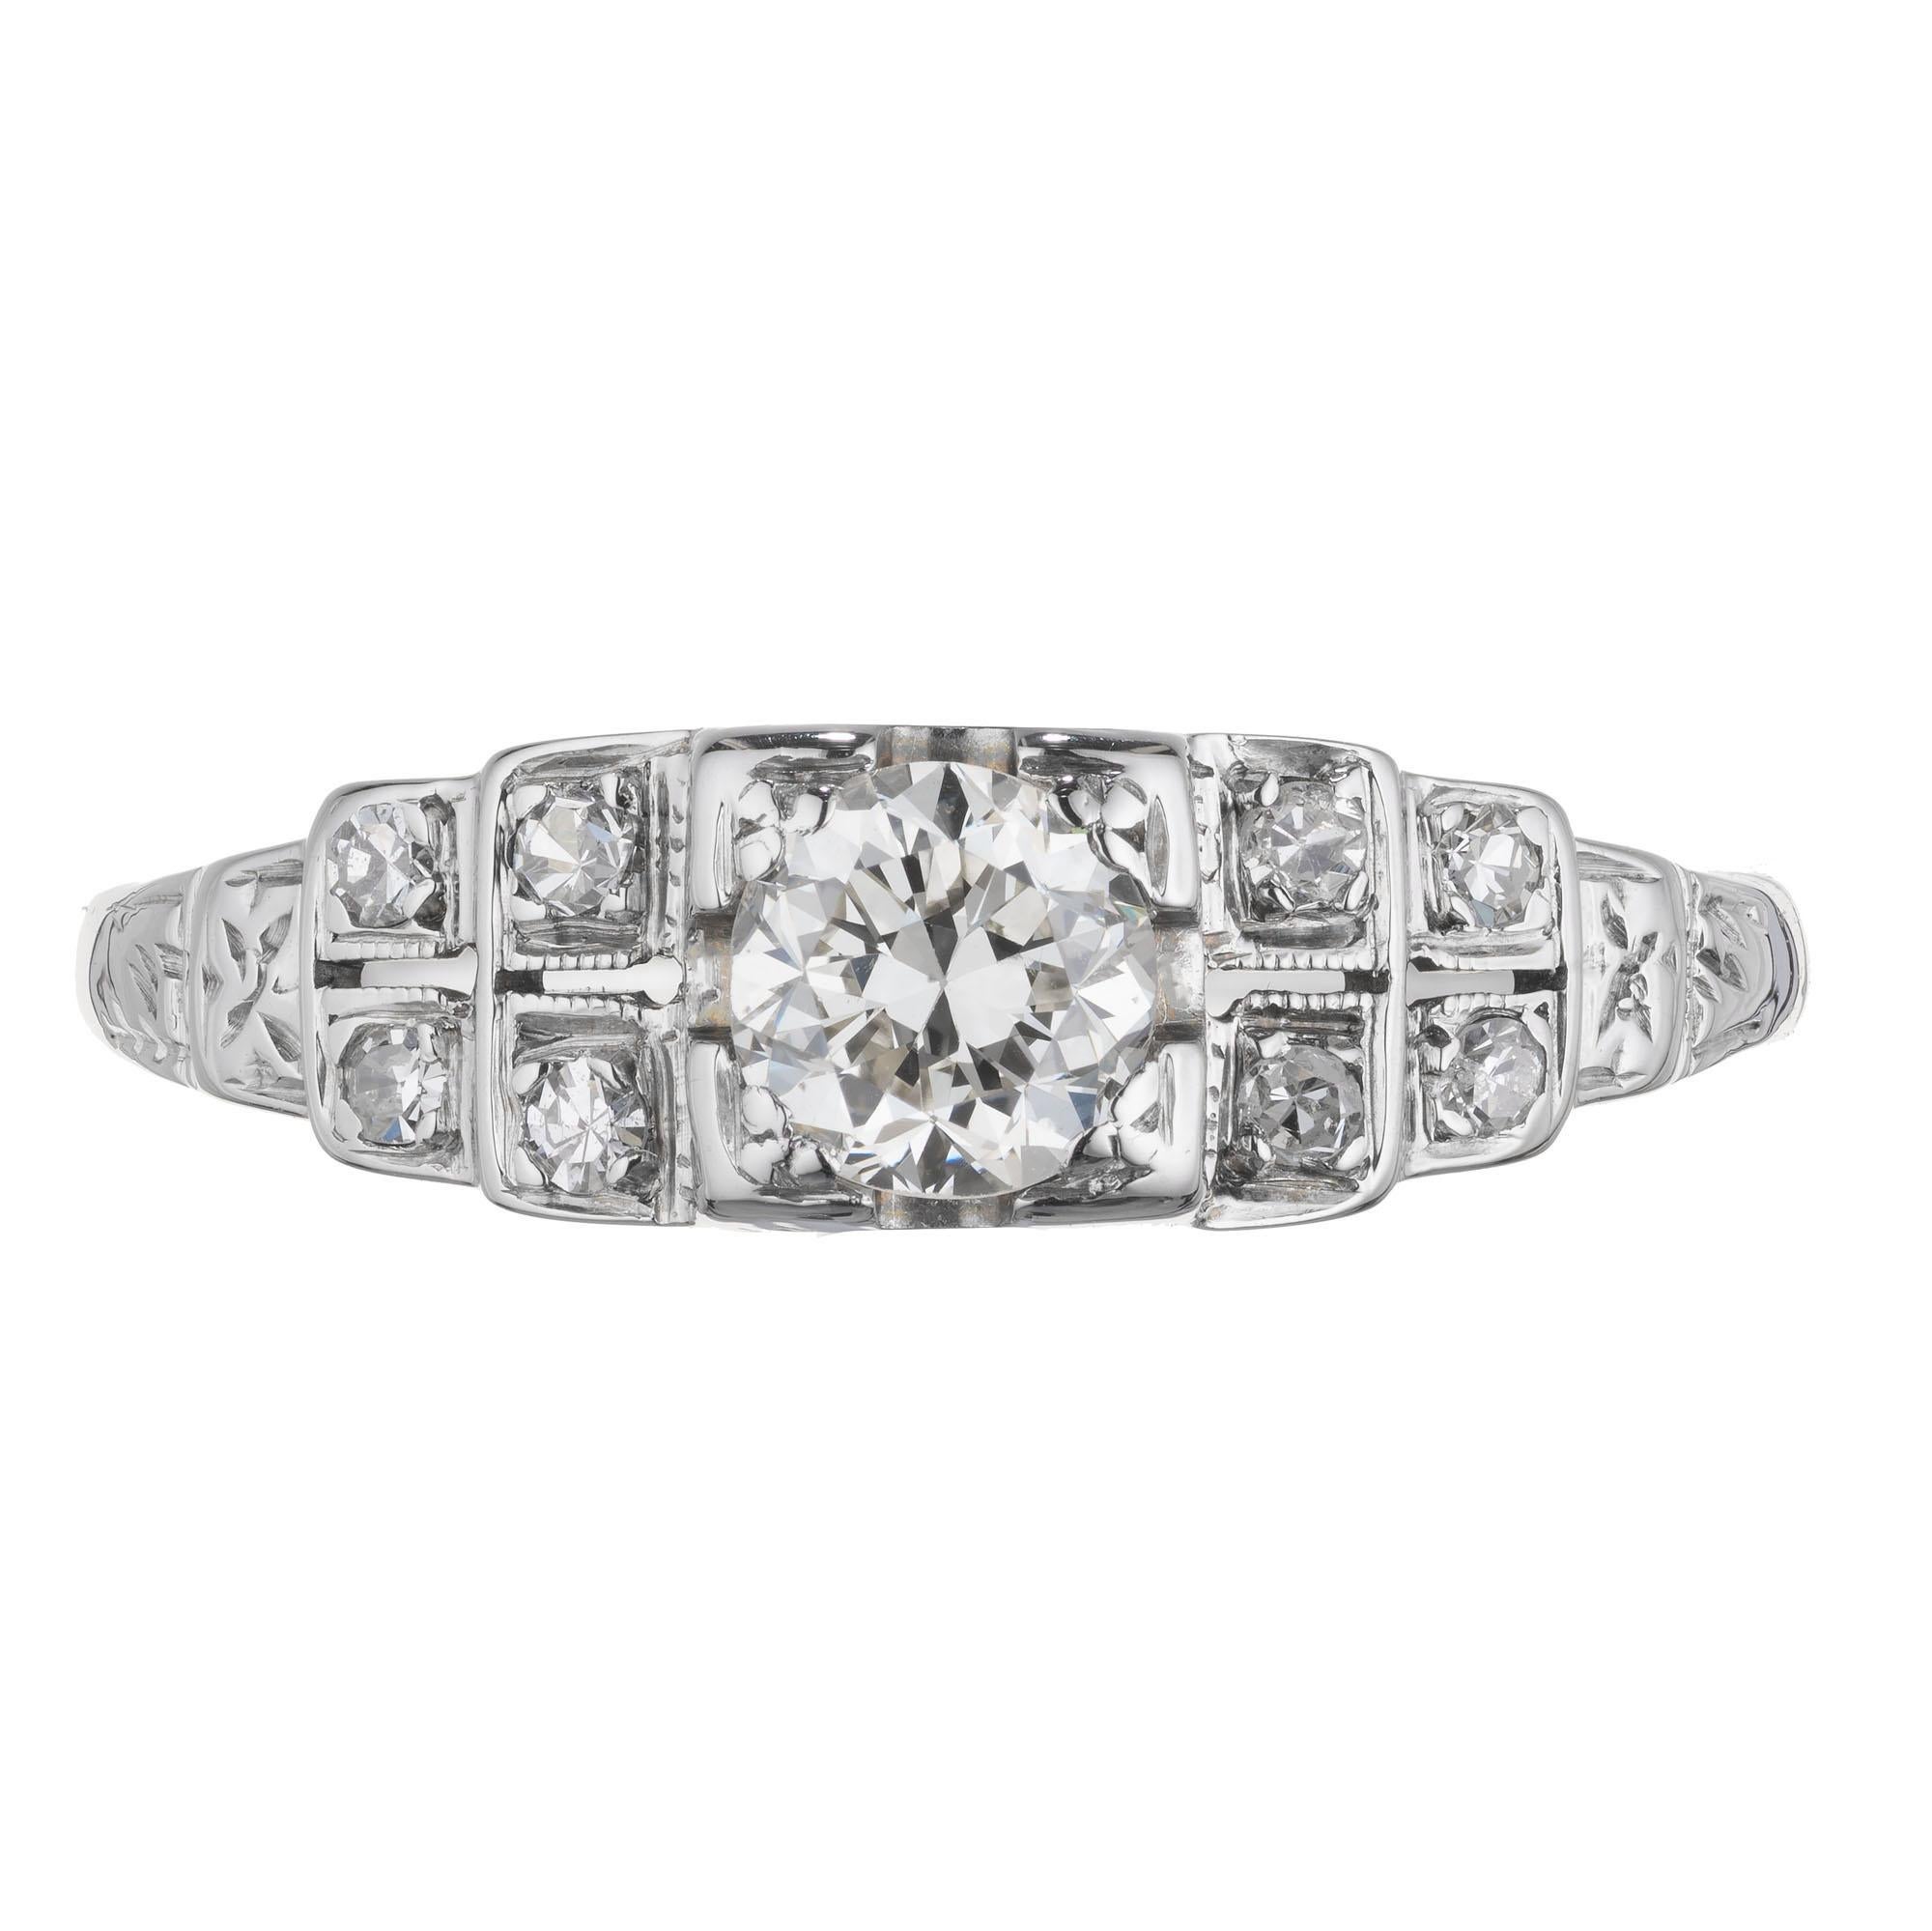 1940's Art Deco style diamond engagement ring. 14k white gold, EGL certified center stone with 8 single cut accent diamonds in a 14k white gold setting. 

1 round brilliant cut diamond I-J VS2, approx. .40ct EGL Certificate # US 400132121D
8 single